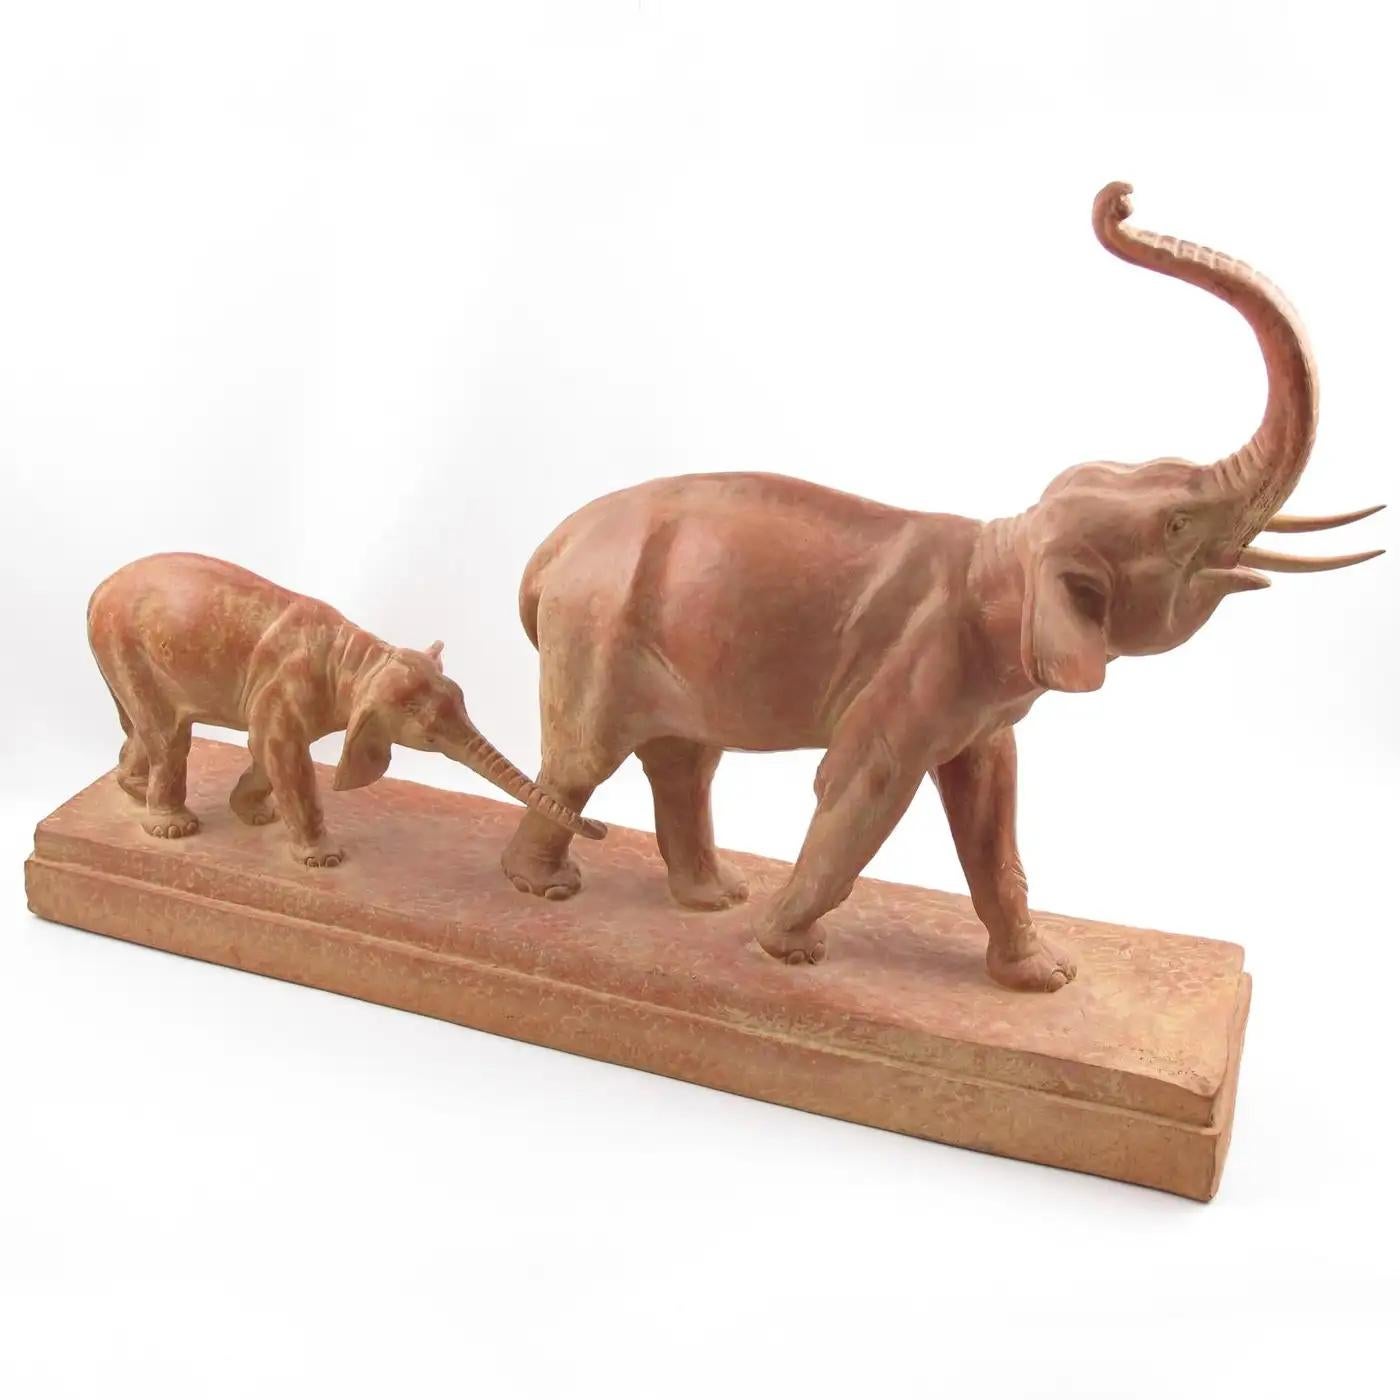 Demetre Chiparus (1888-1950) designed this gorgeous Art Deco fine terracotta sculpture. The artwork features a brown-red patinated Art Deco walking elephants on a large base. The female elephant is trumpeting and followed by her baby. The